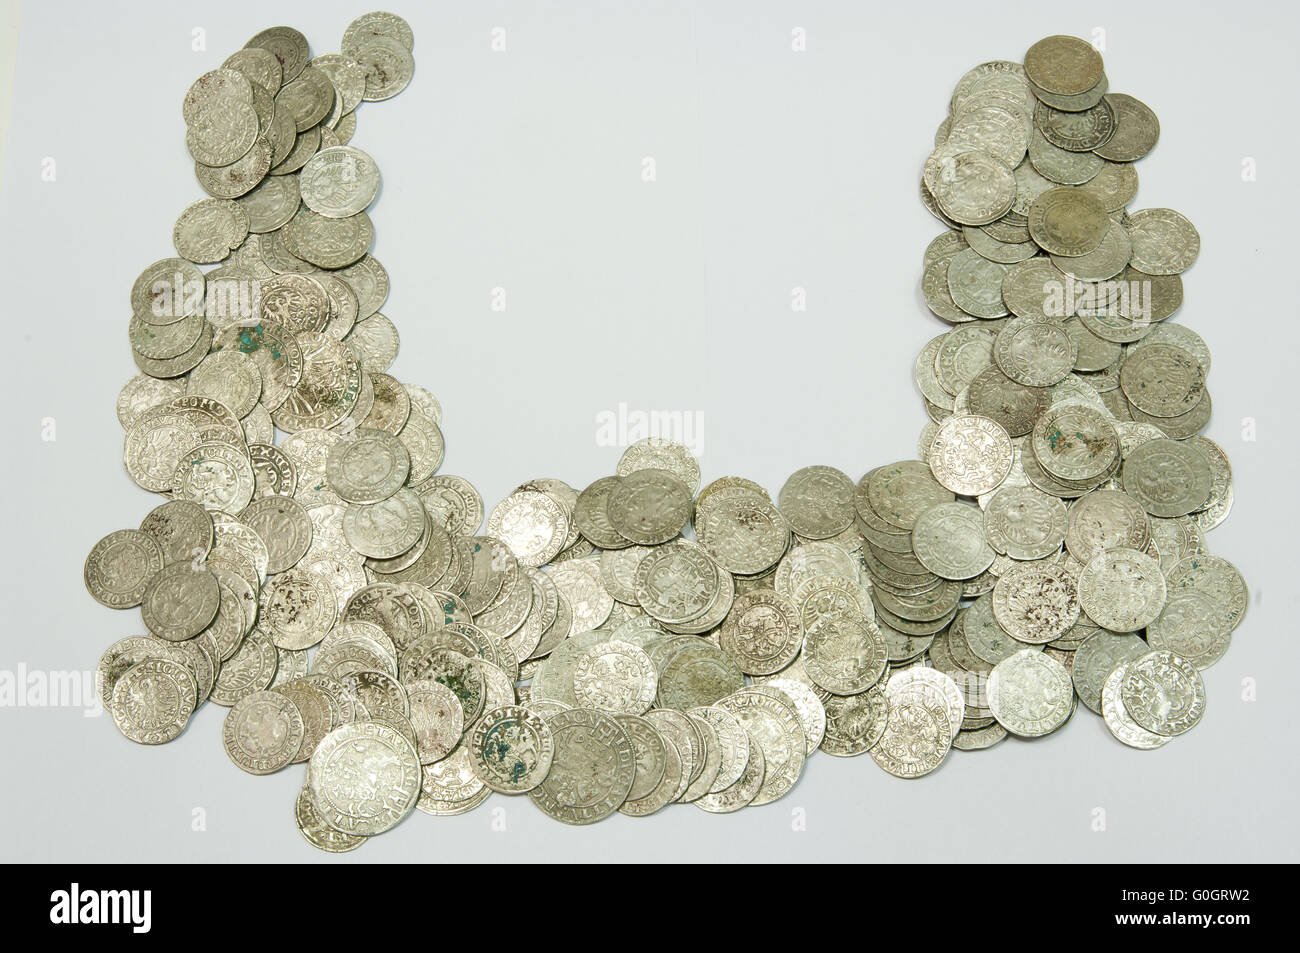 Ancient coins of different metals Stock Photo